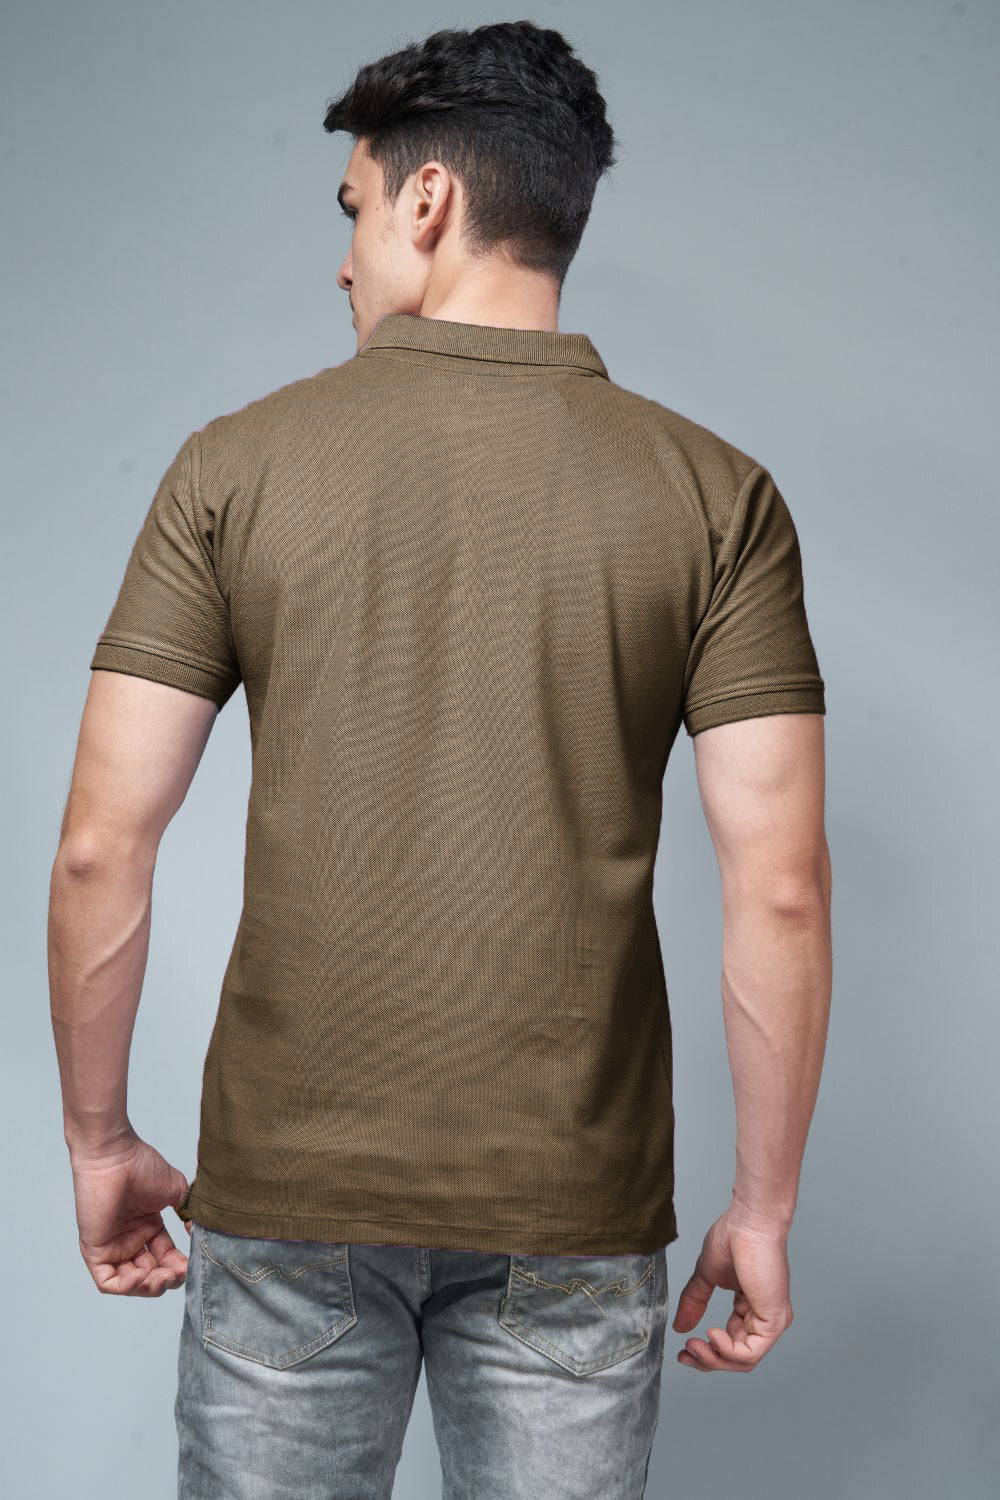 Olive colored, identity Polo T-shirts for men with collar and half sleeves, back view.